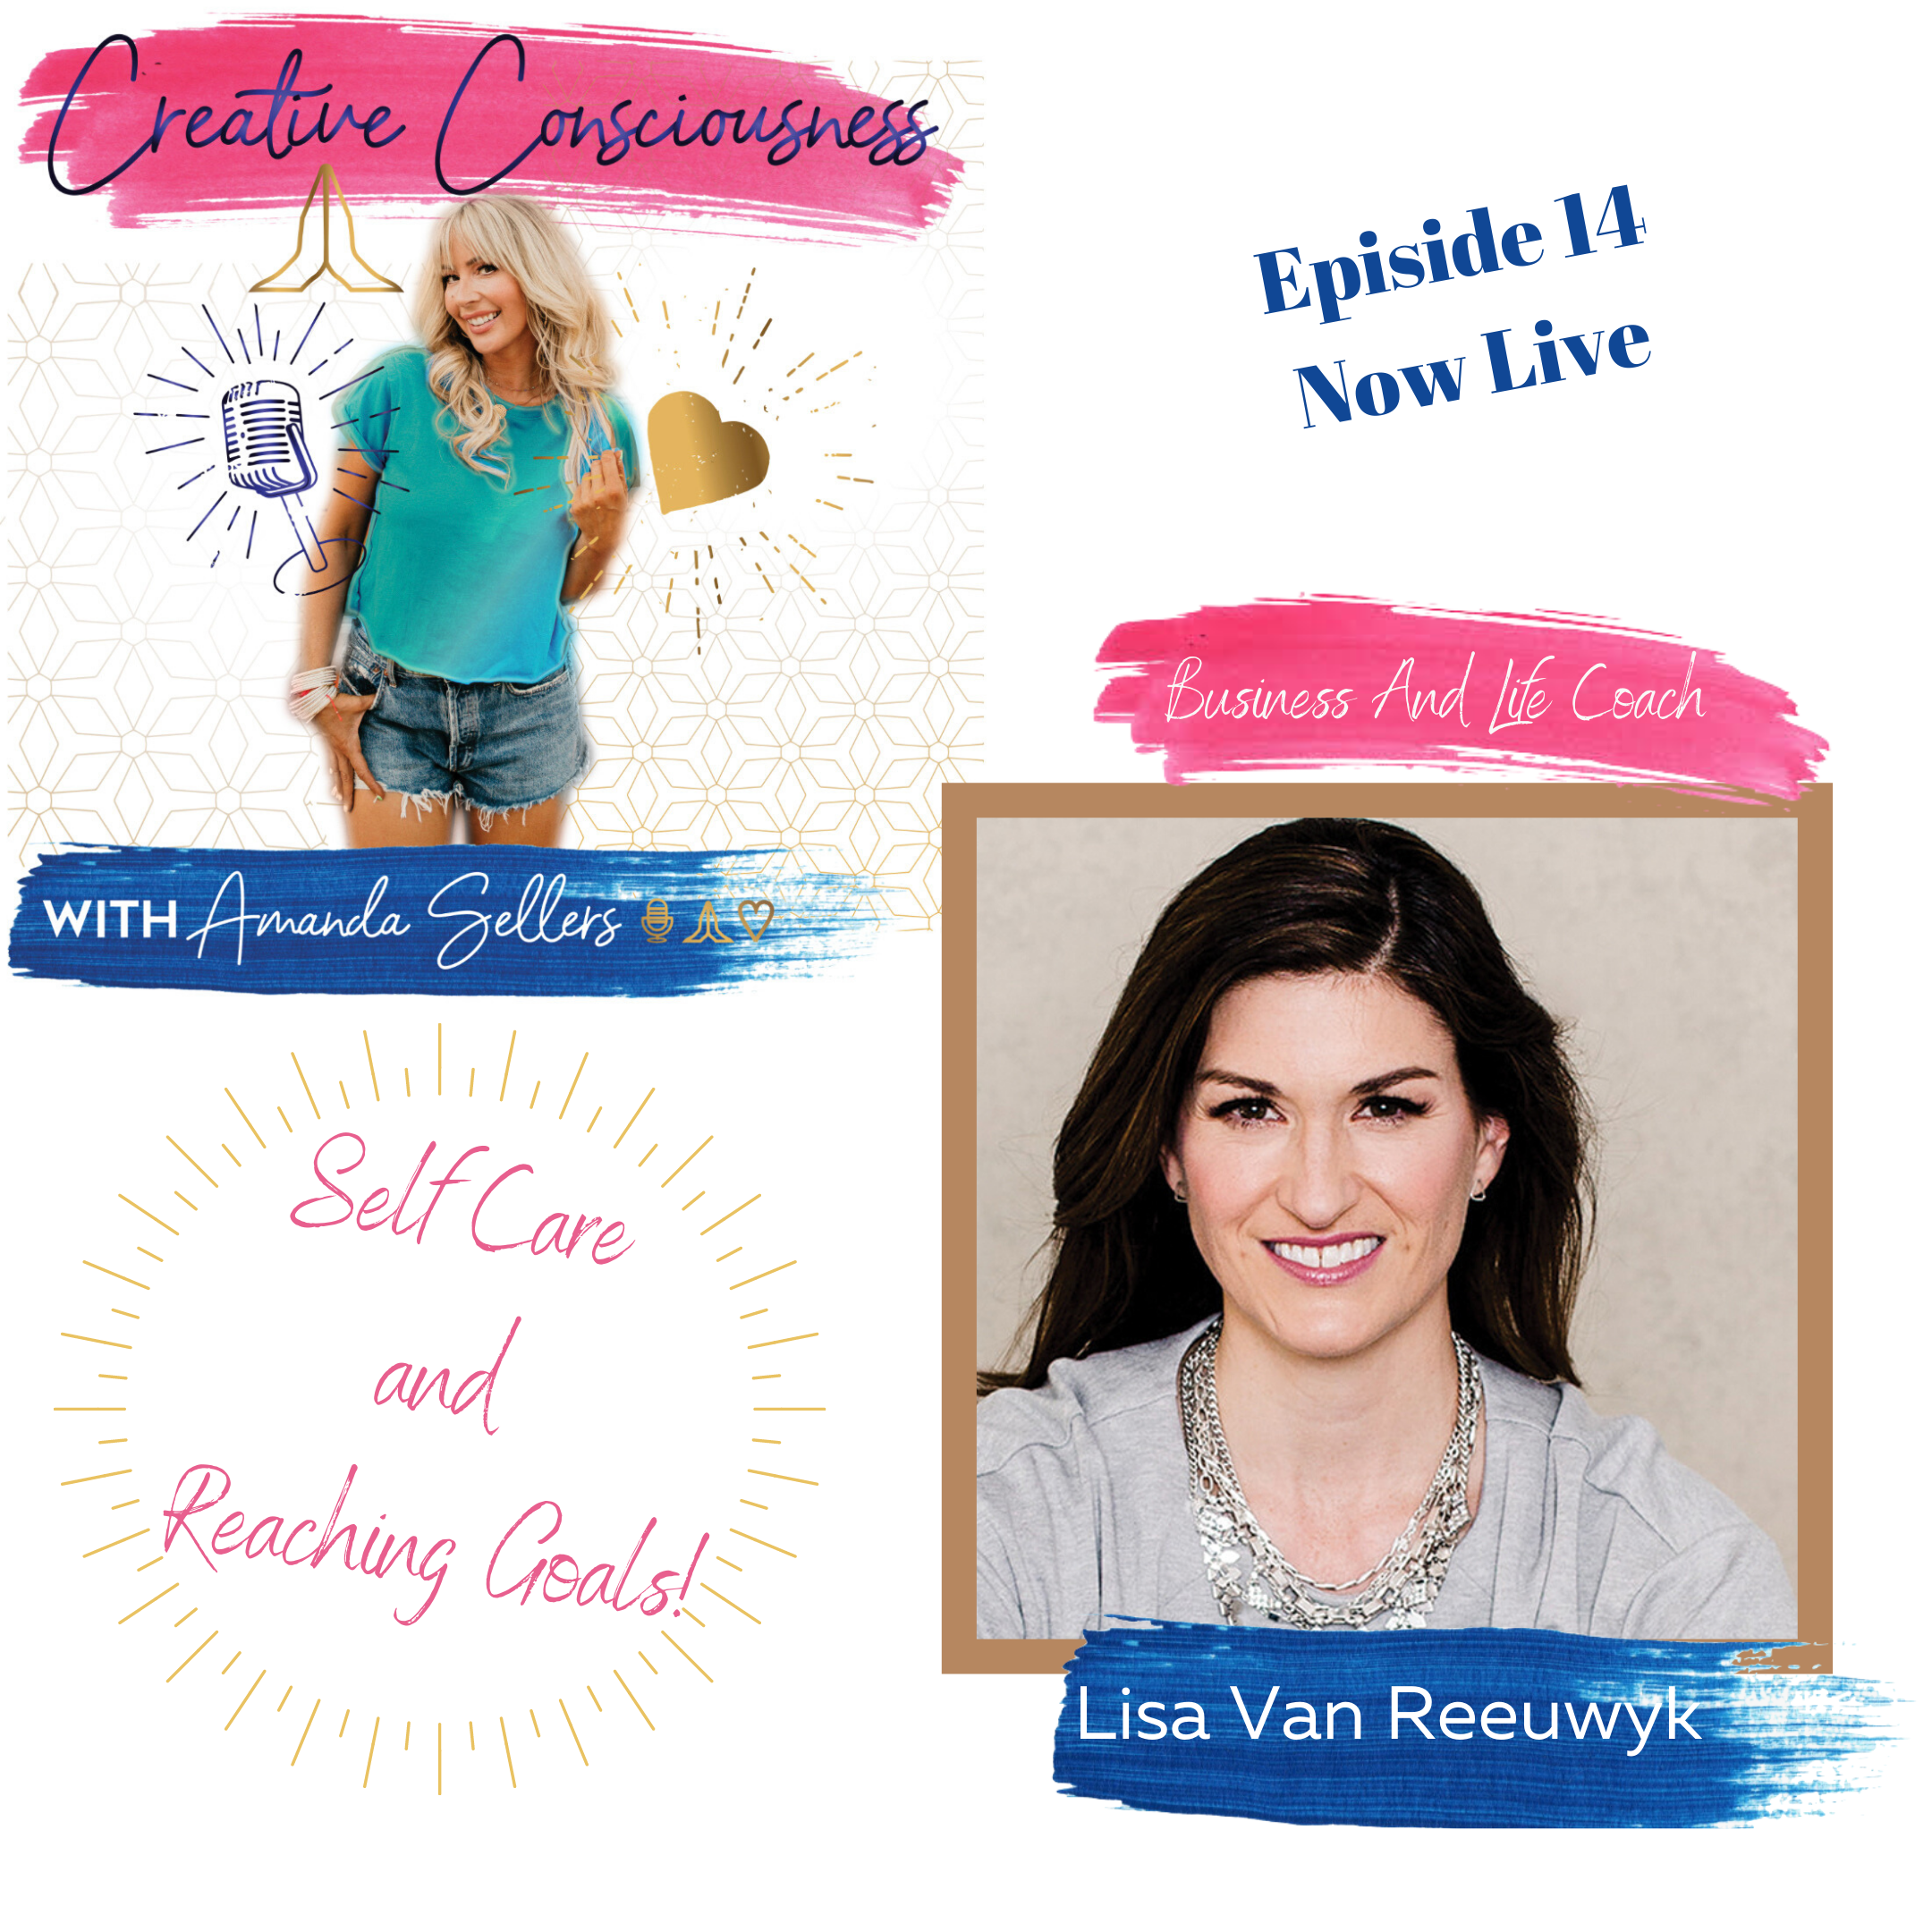 Creative Consciousness Podcast with Amanda Sellers and Lisa can Reeuwyk